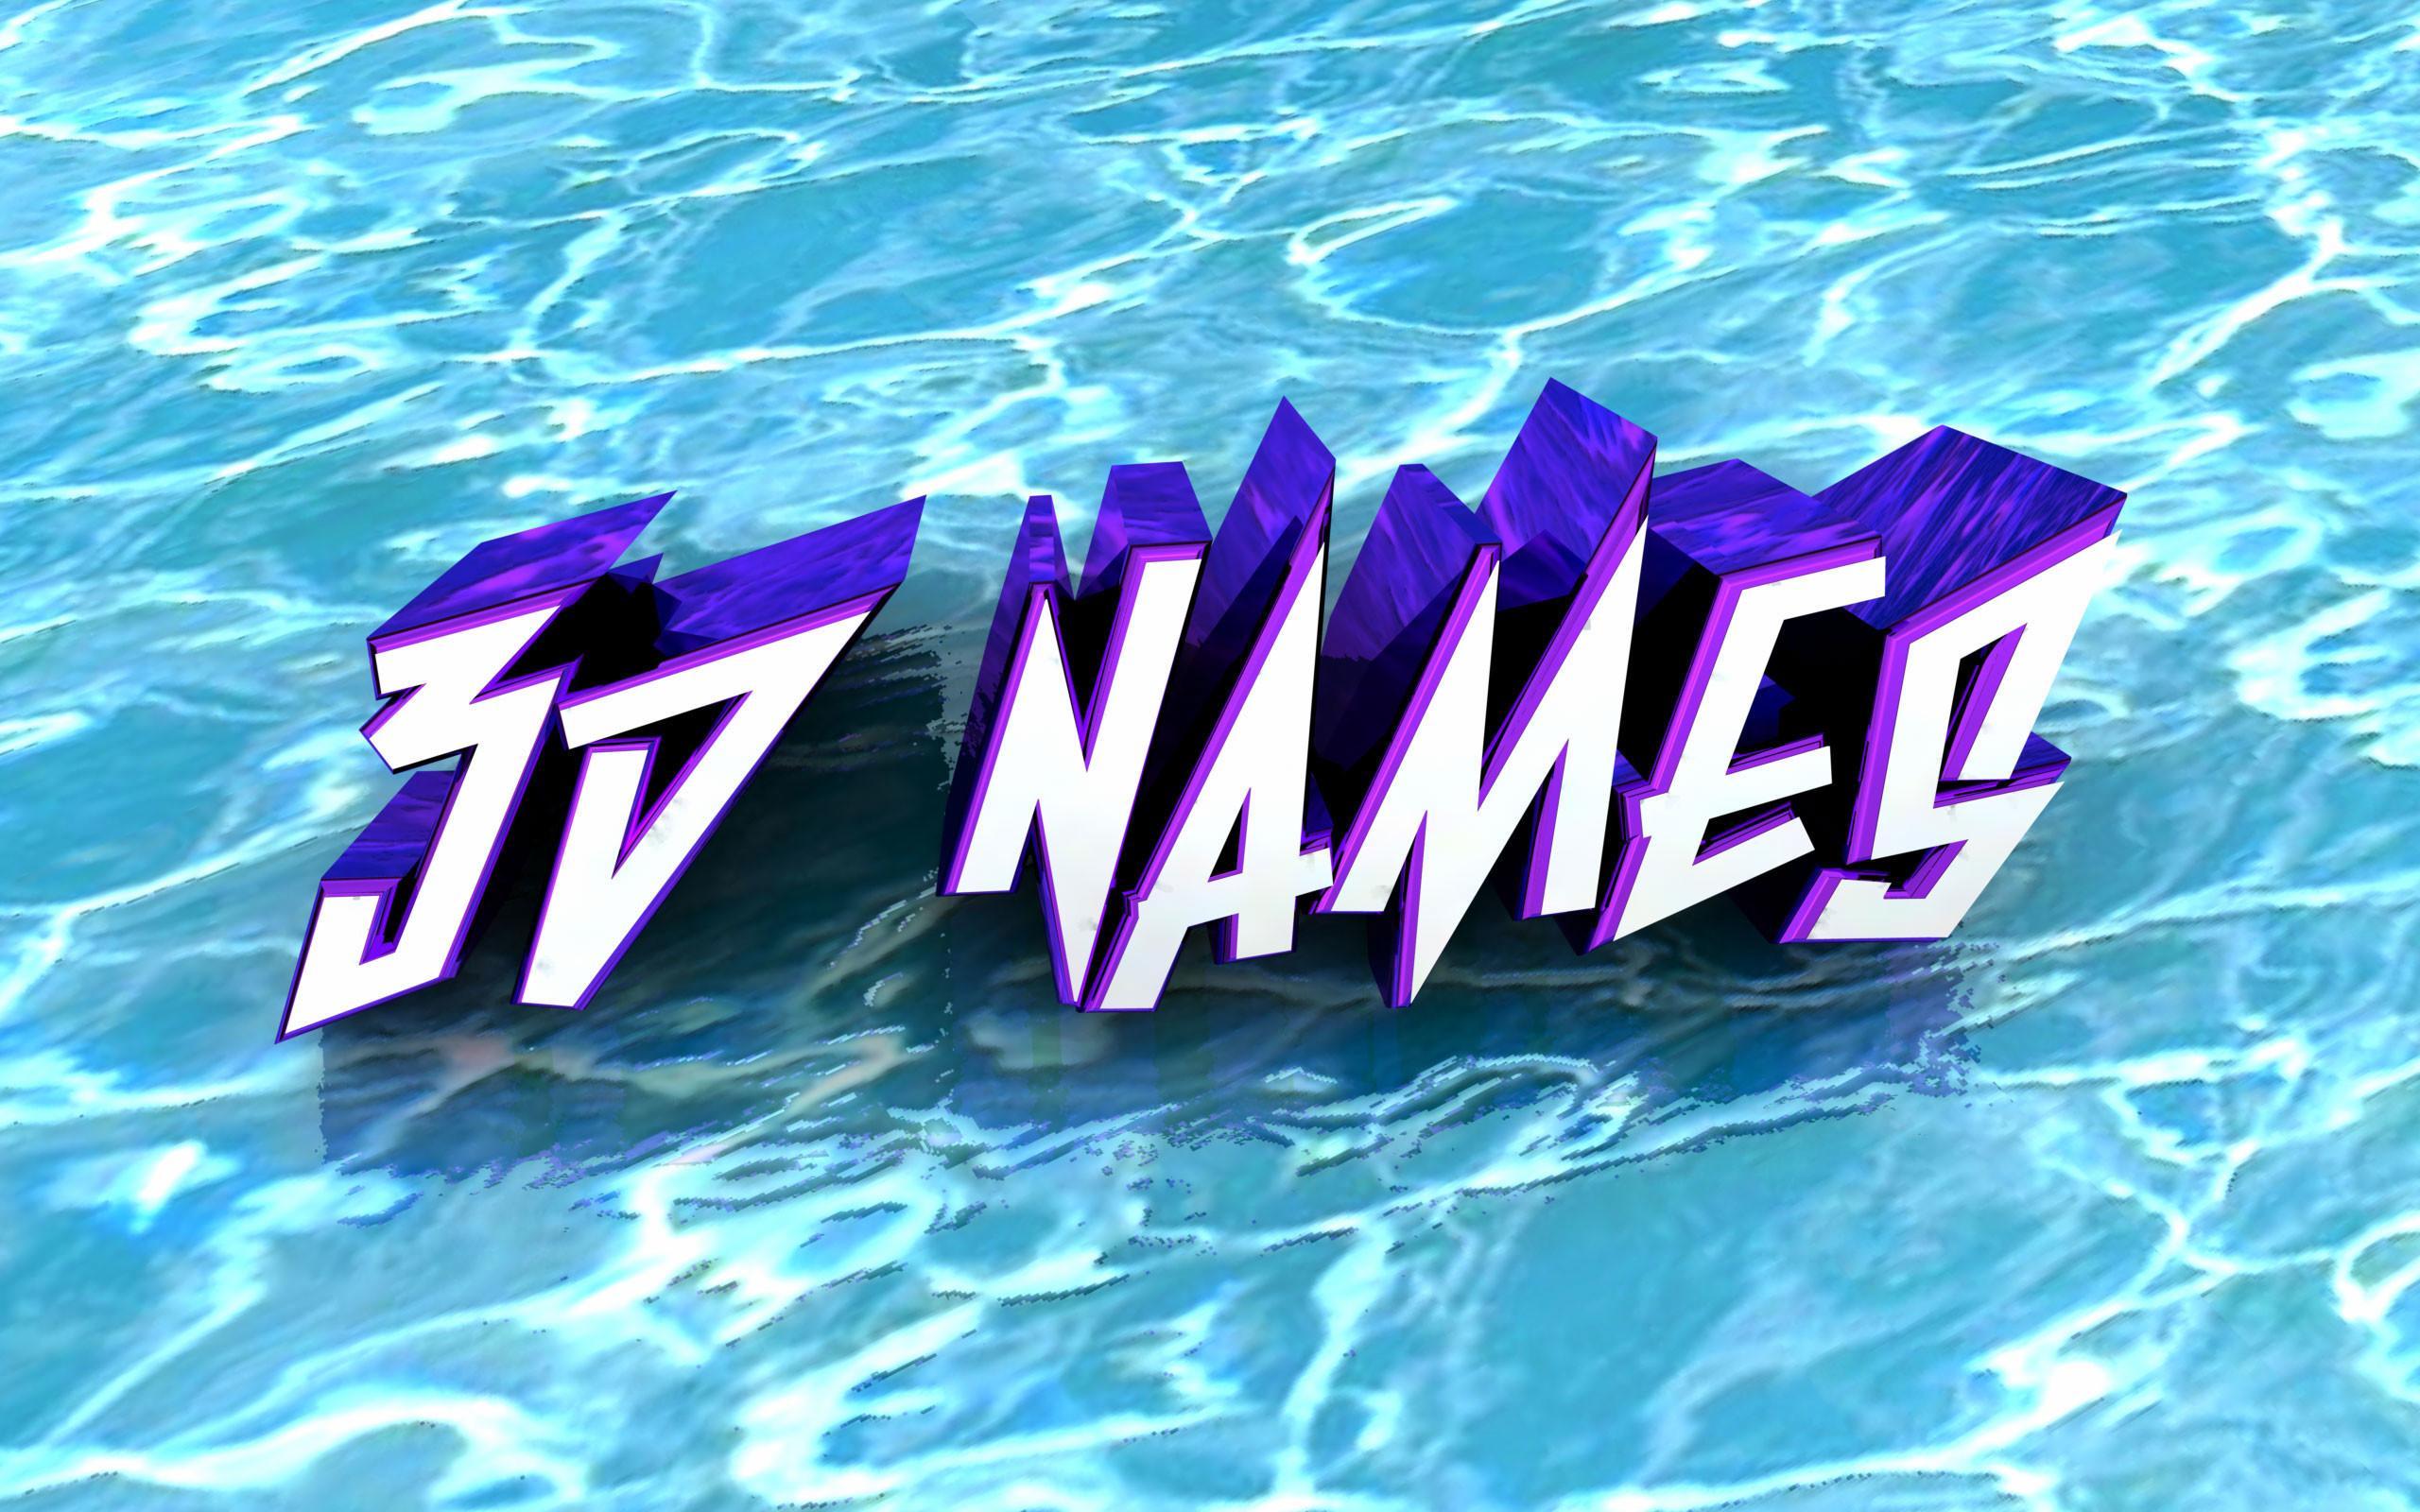 3D Name Wallpaper Animations